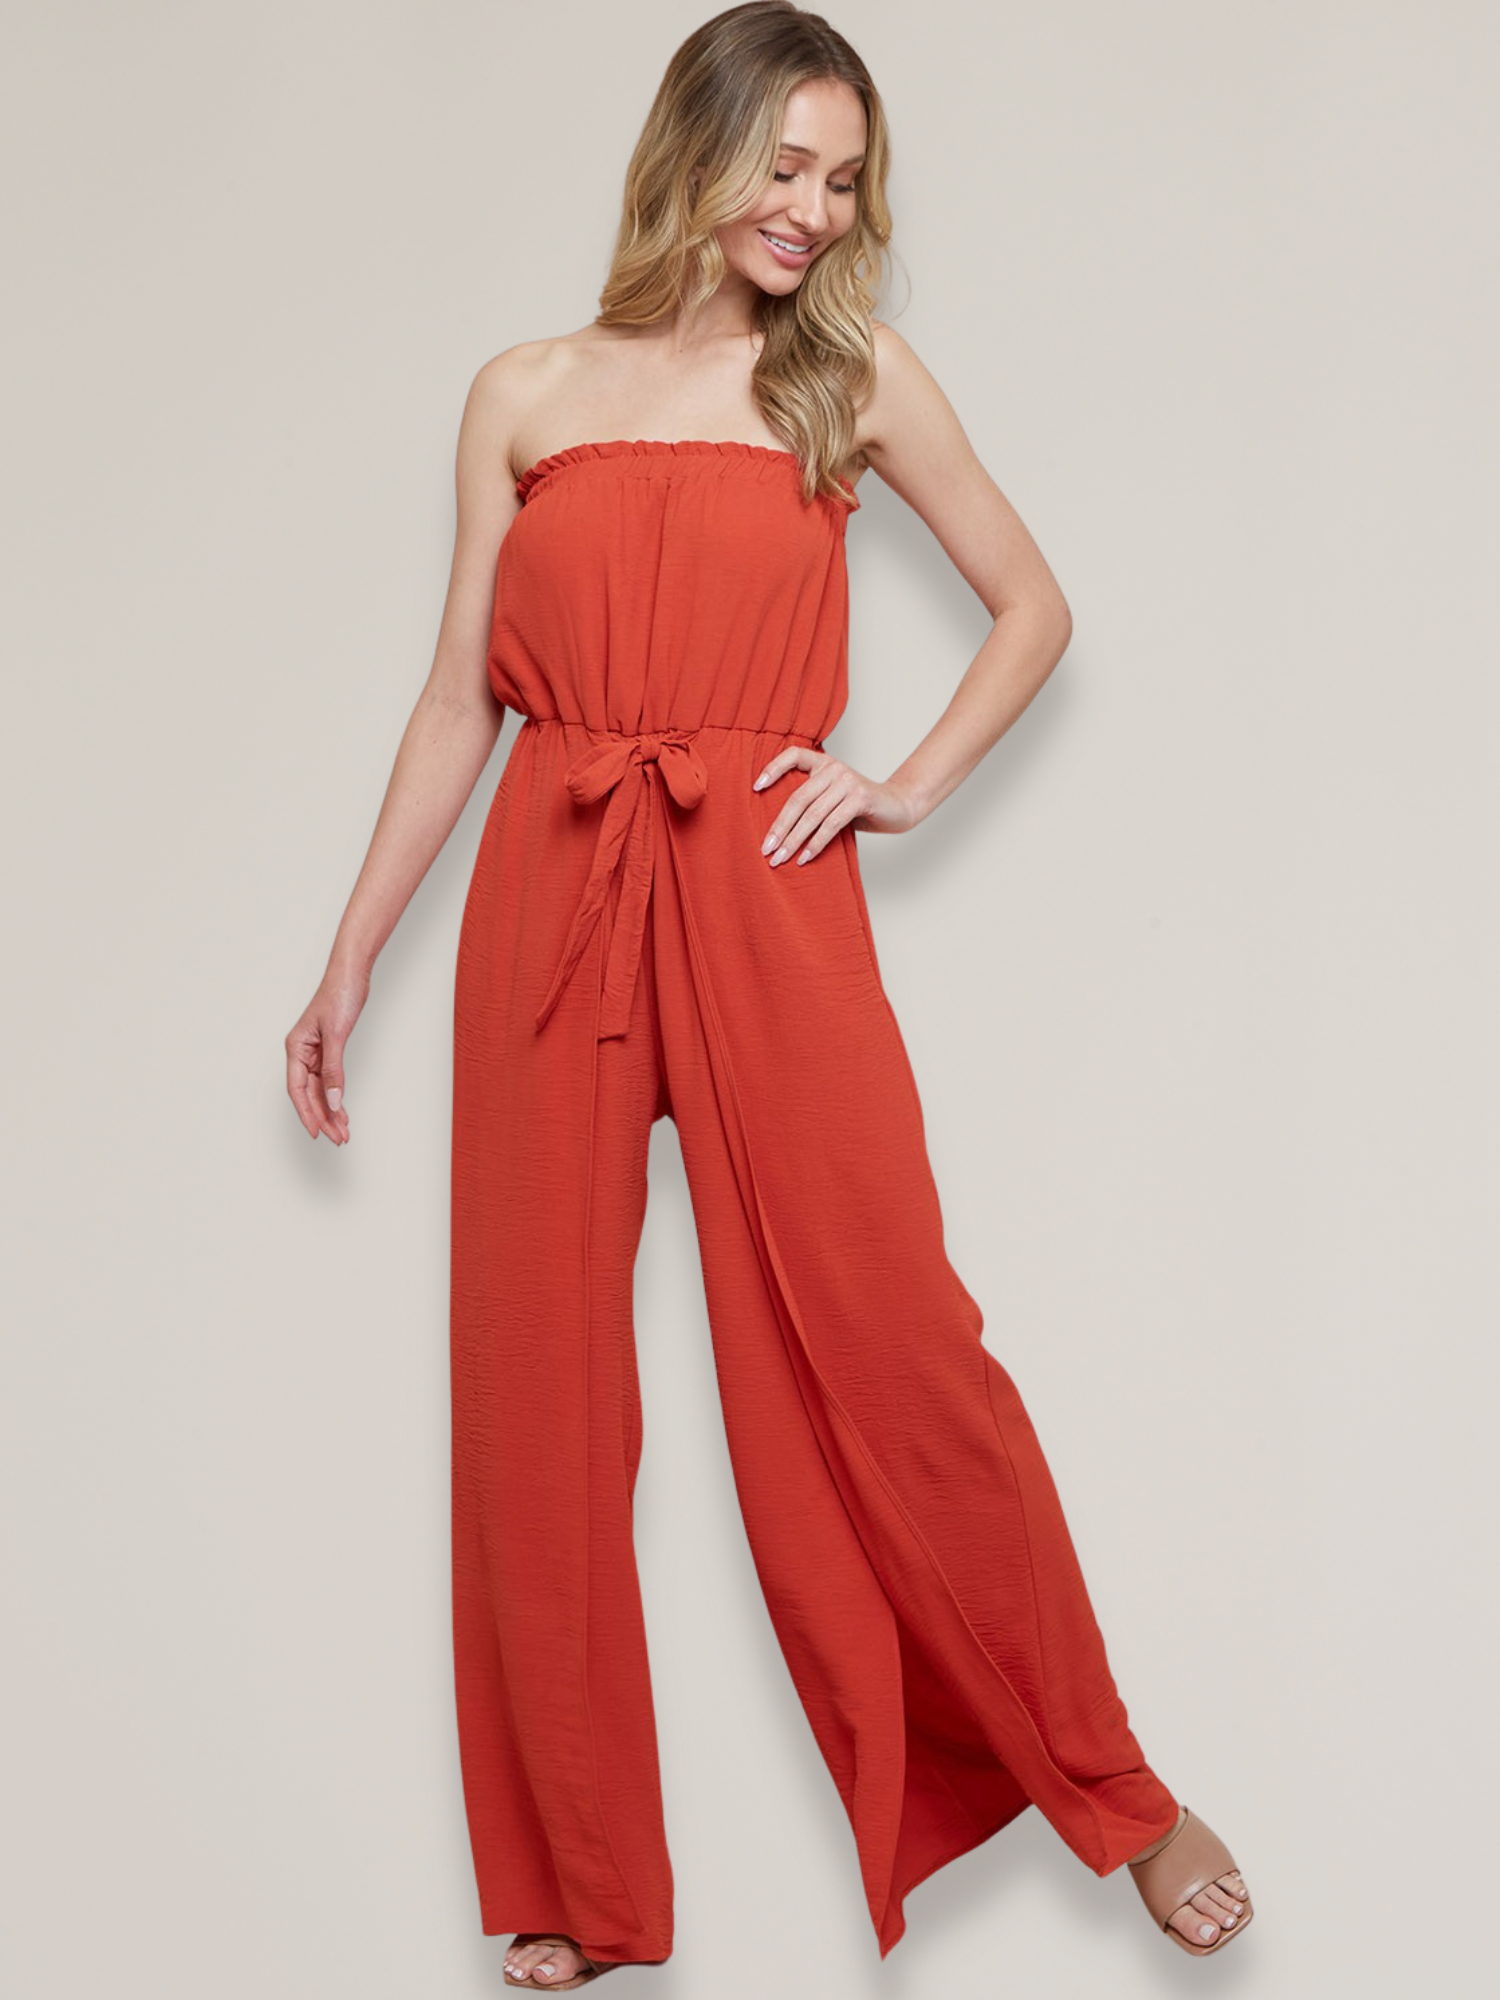 Buy FOREVER 21 Rust Orange & Off White Checked Basic Jumpsuit - Jumpsuit  for Women 8821329 | Myntra